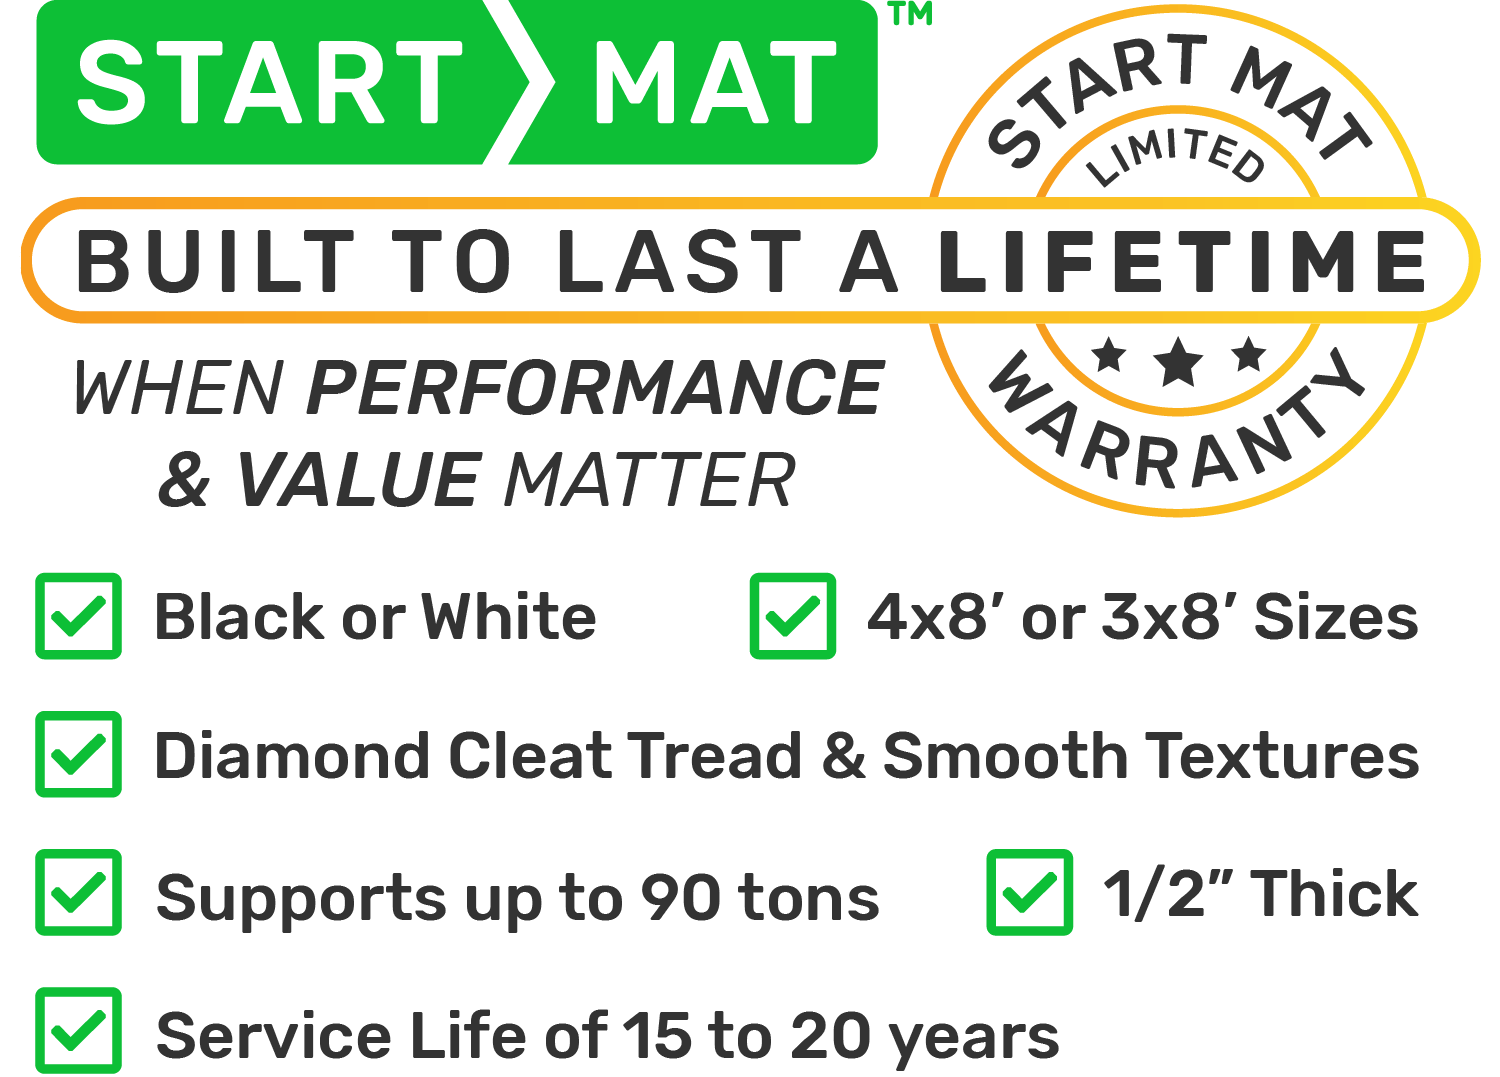 StartMat Brand Advantages - StartMats come in 3x8 or 4x8 size, black of white mat color, support upto 90 tons and come with a limited lifetime warranty